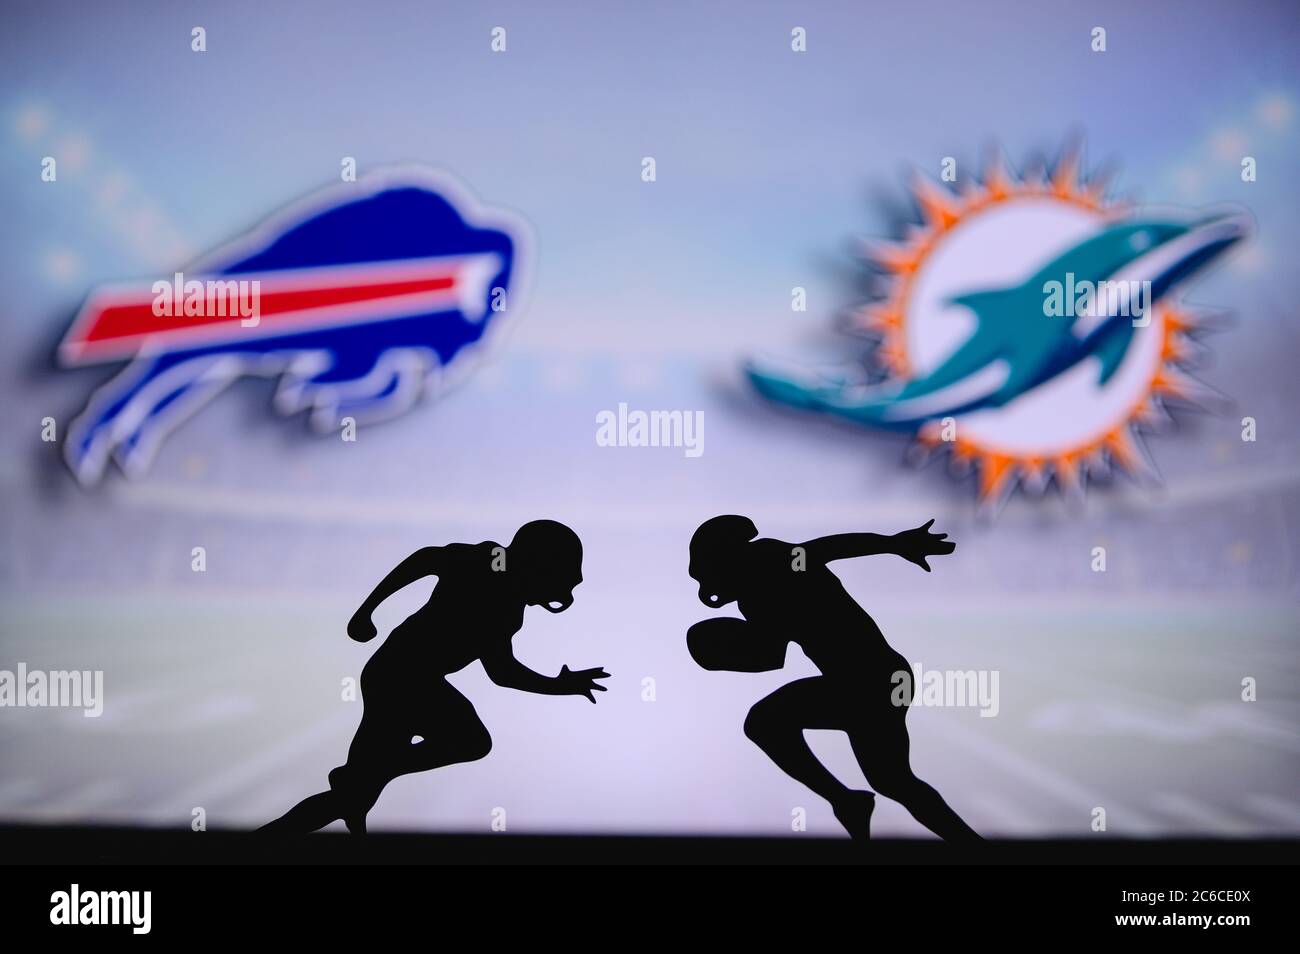 Buffalo Bills vs. Miami Dolphins. NFL match poster. Two american football  players silhouette facing each other on the field. Clubs logo in background  Stock Photo - Alamy